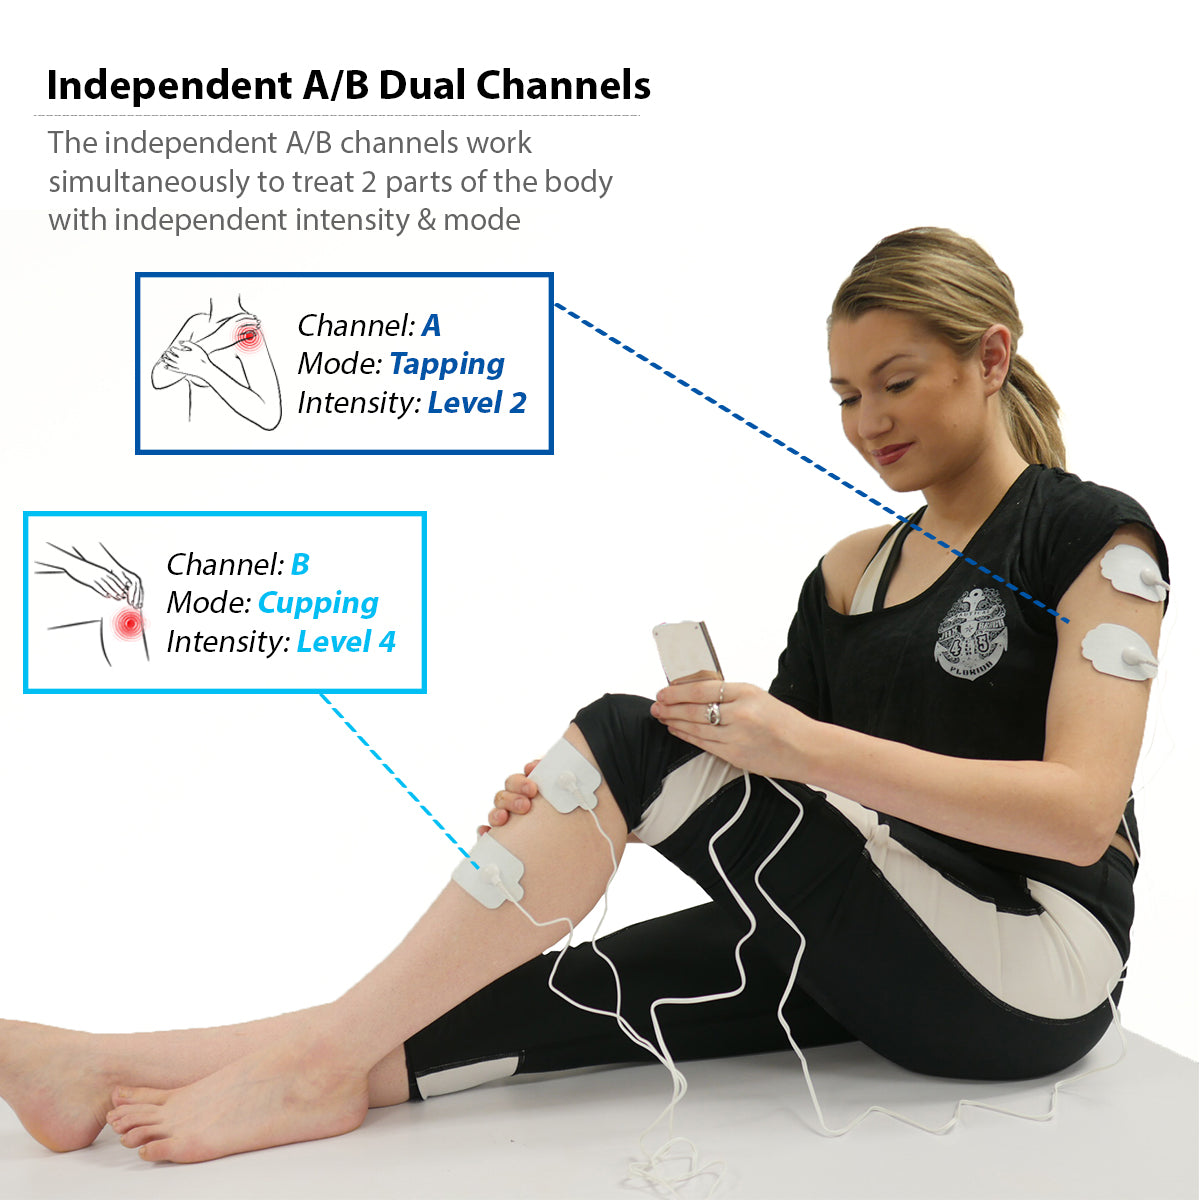 Muscle stimulator • Compare & find best prices today »